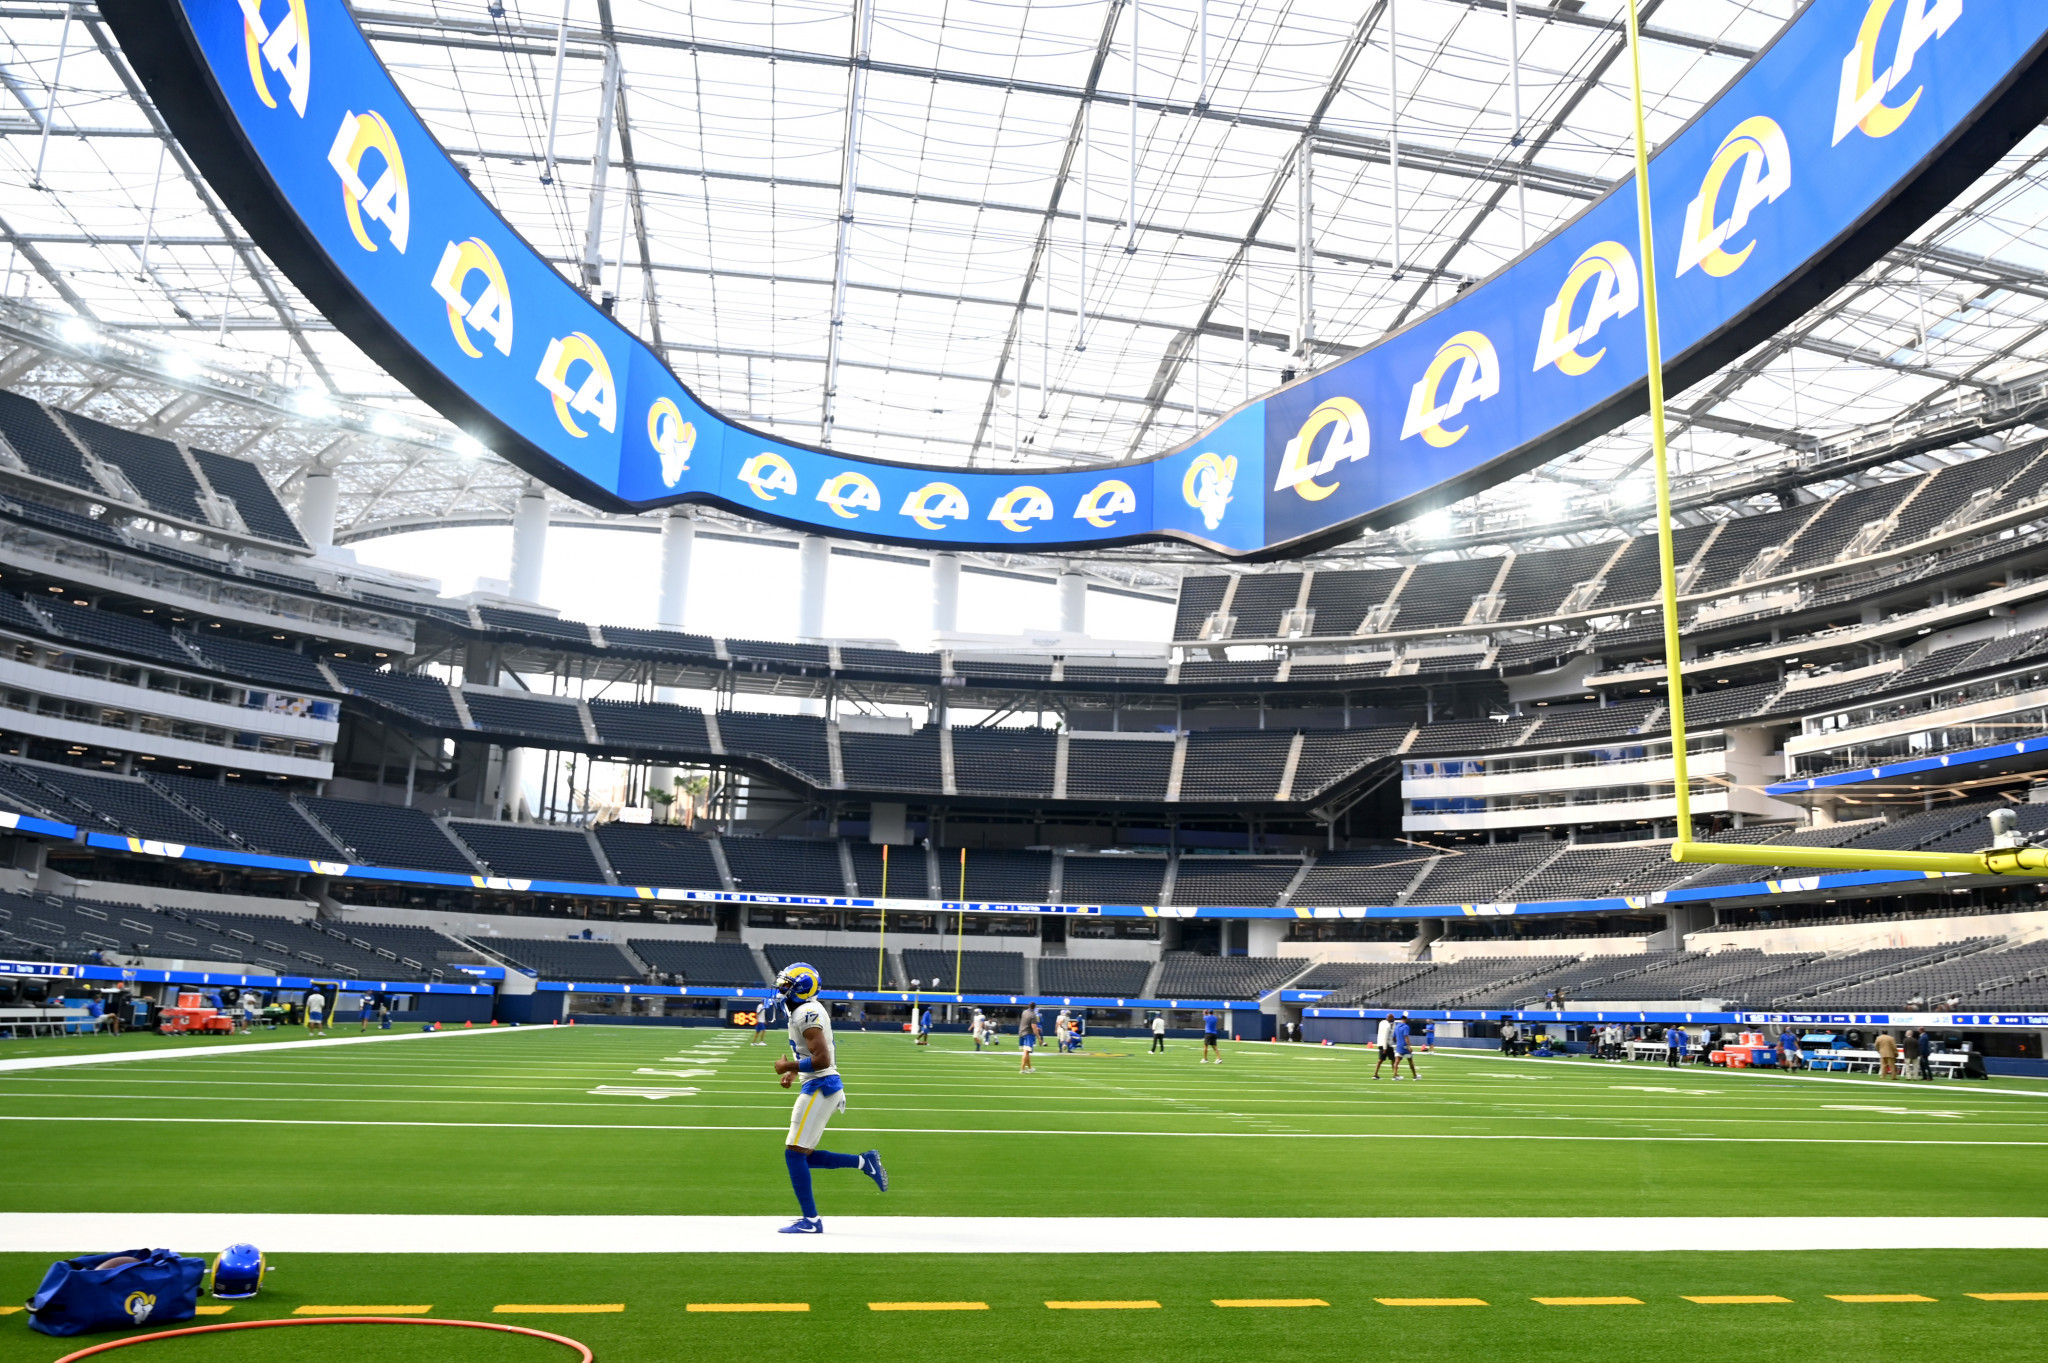 A Oculus overhead scoreboard, the 70,000 square foot double-sided 4K LED video board,is the centrepiece of the $3 billion SoFi Stadium, which will be home to NFL side Los Angeles Rams ©Getty Images